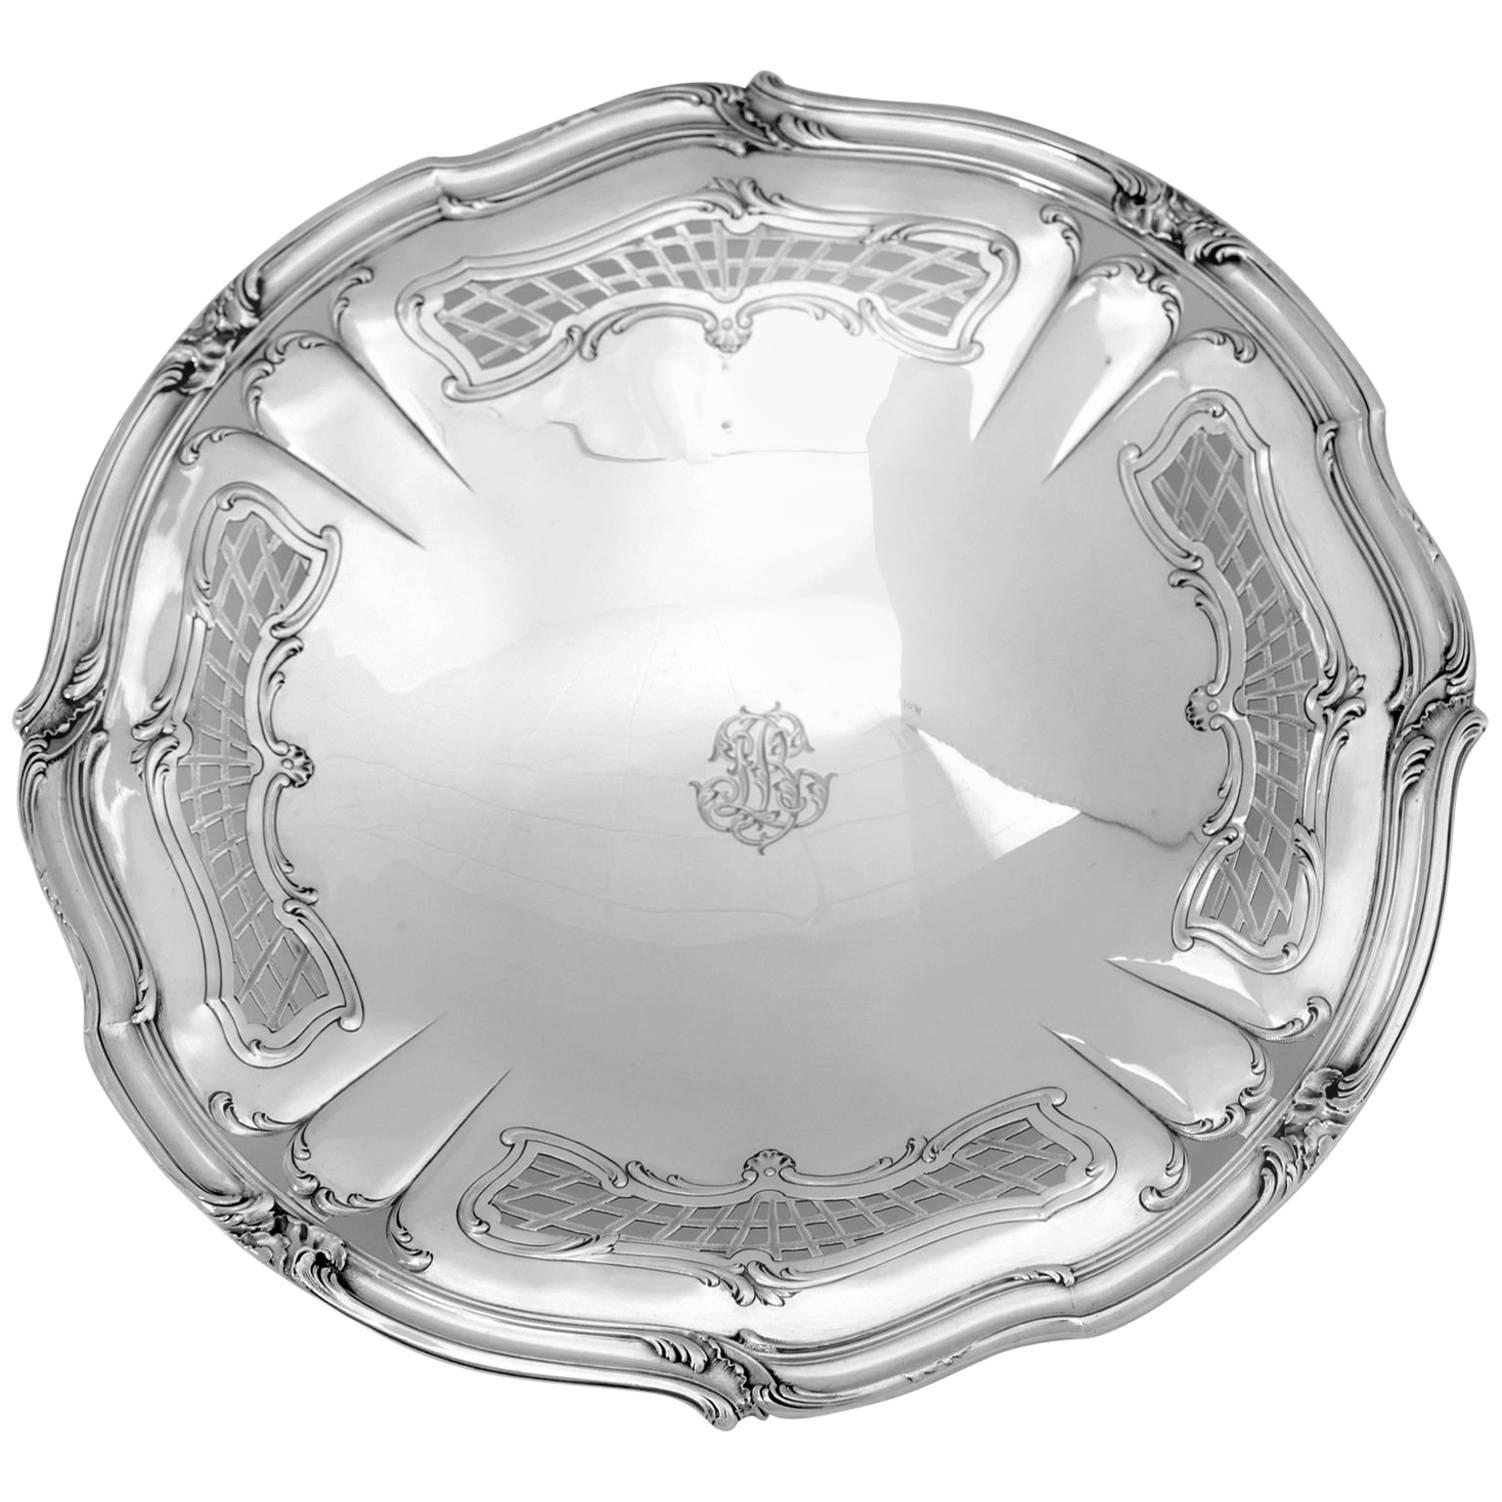 Henin Fabulous French All Sterling Silver Compote, Serving Dish, Tray Rococo For Sale